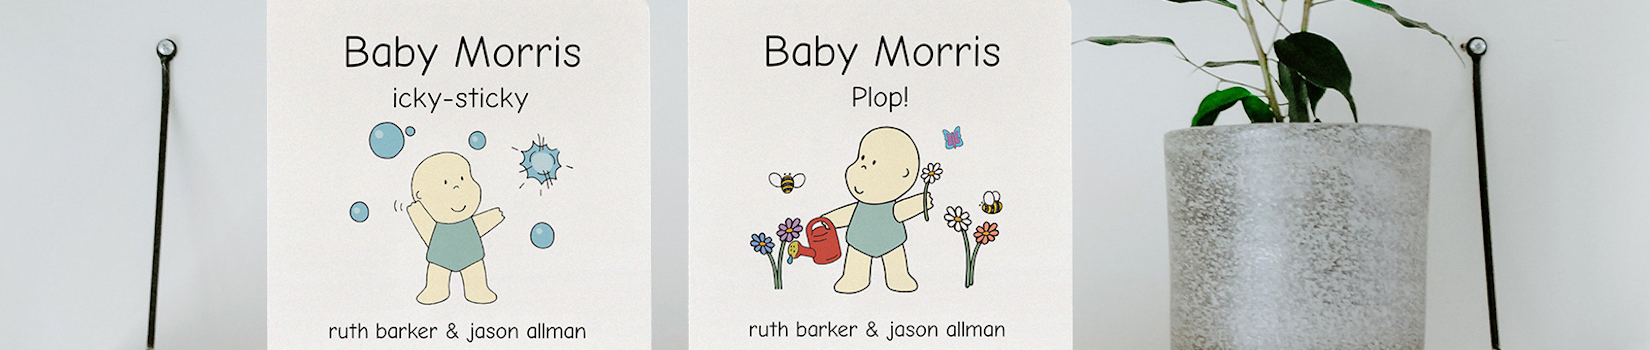 Baby Morris Board Books and Games